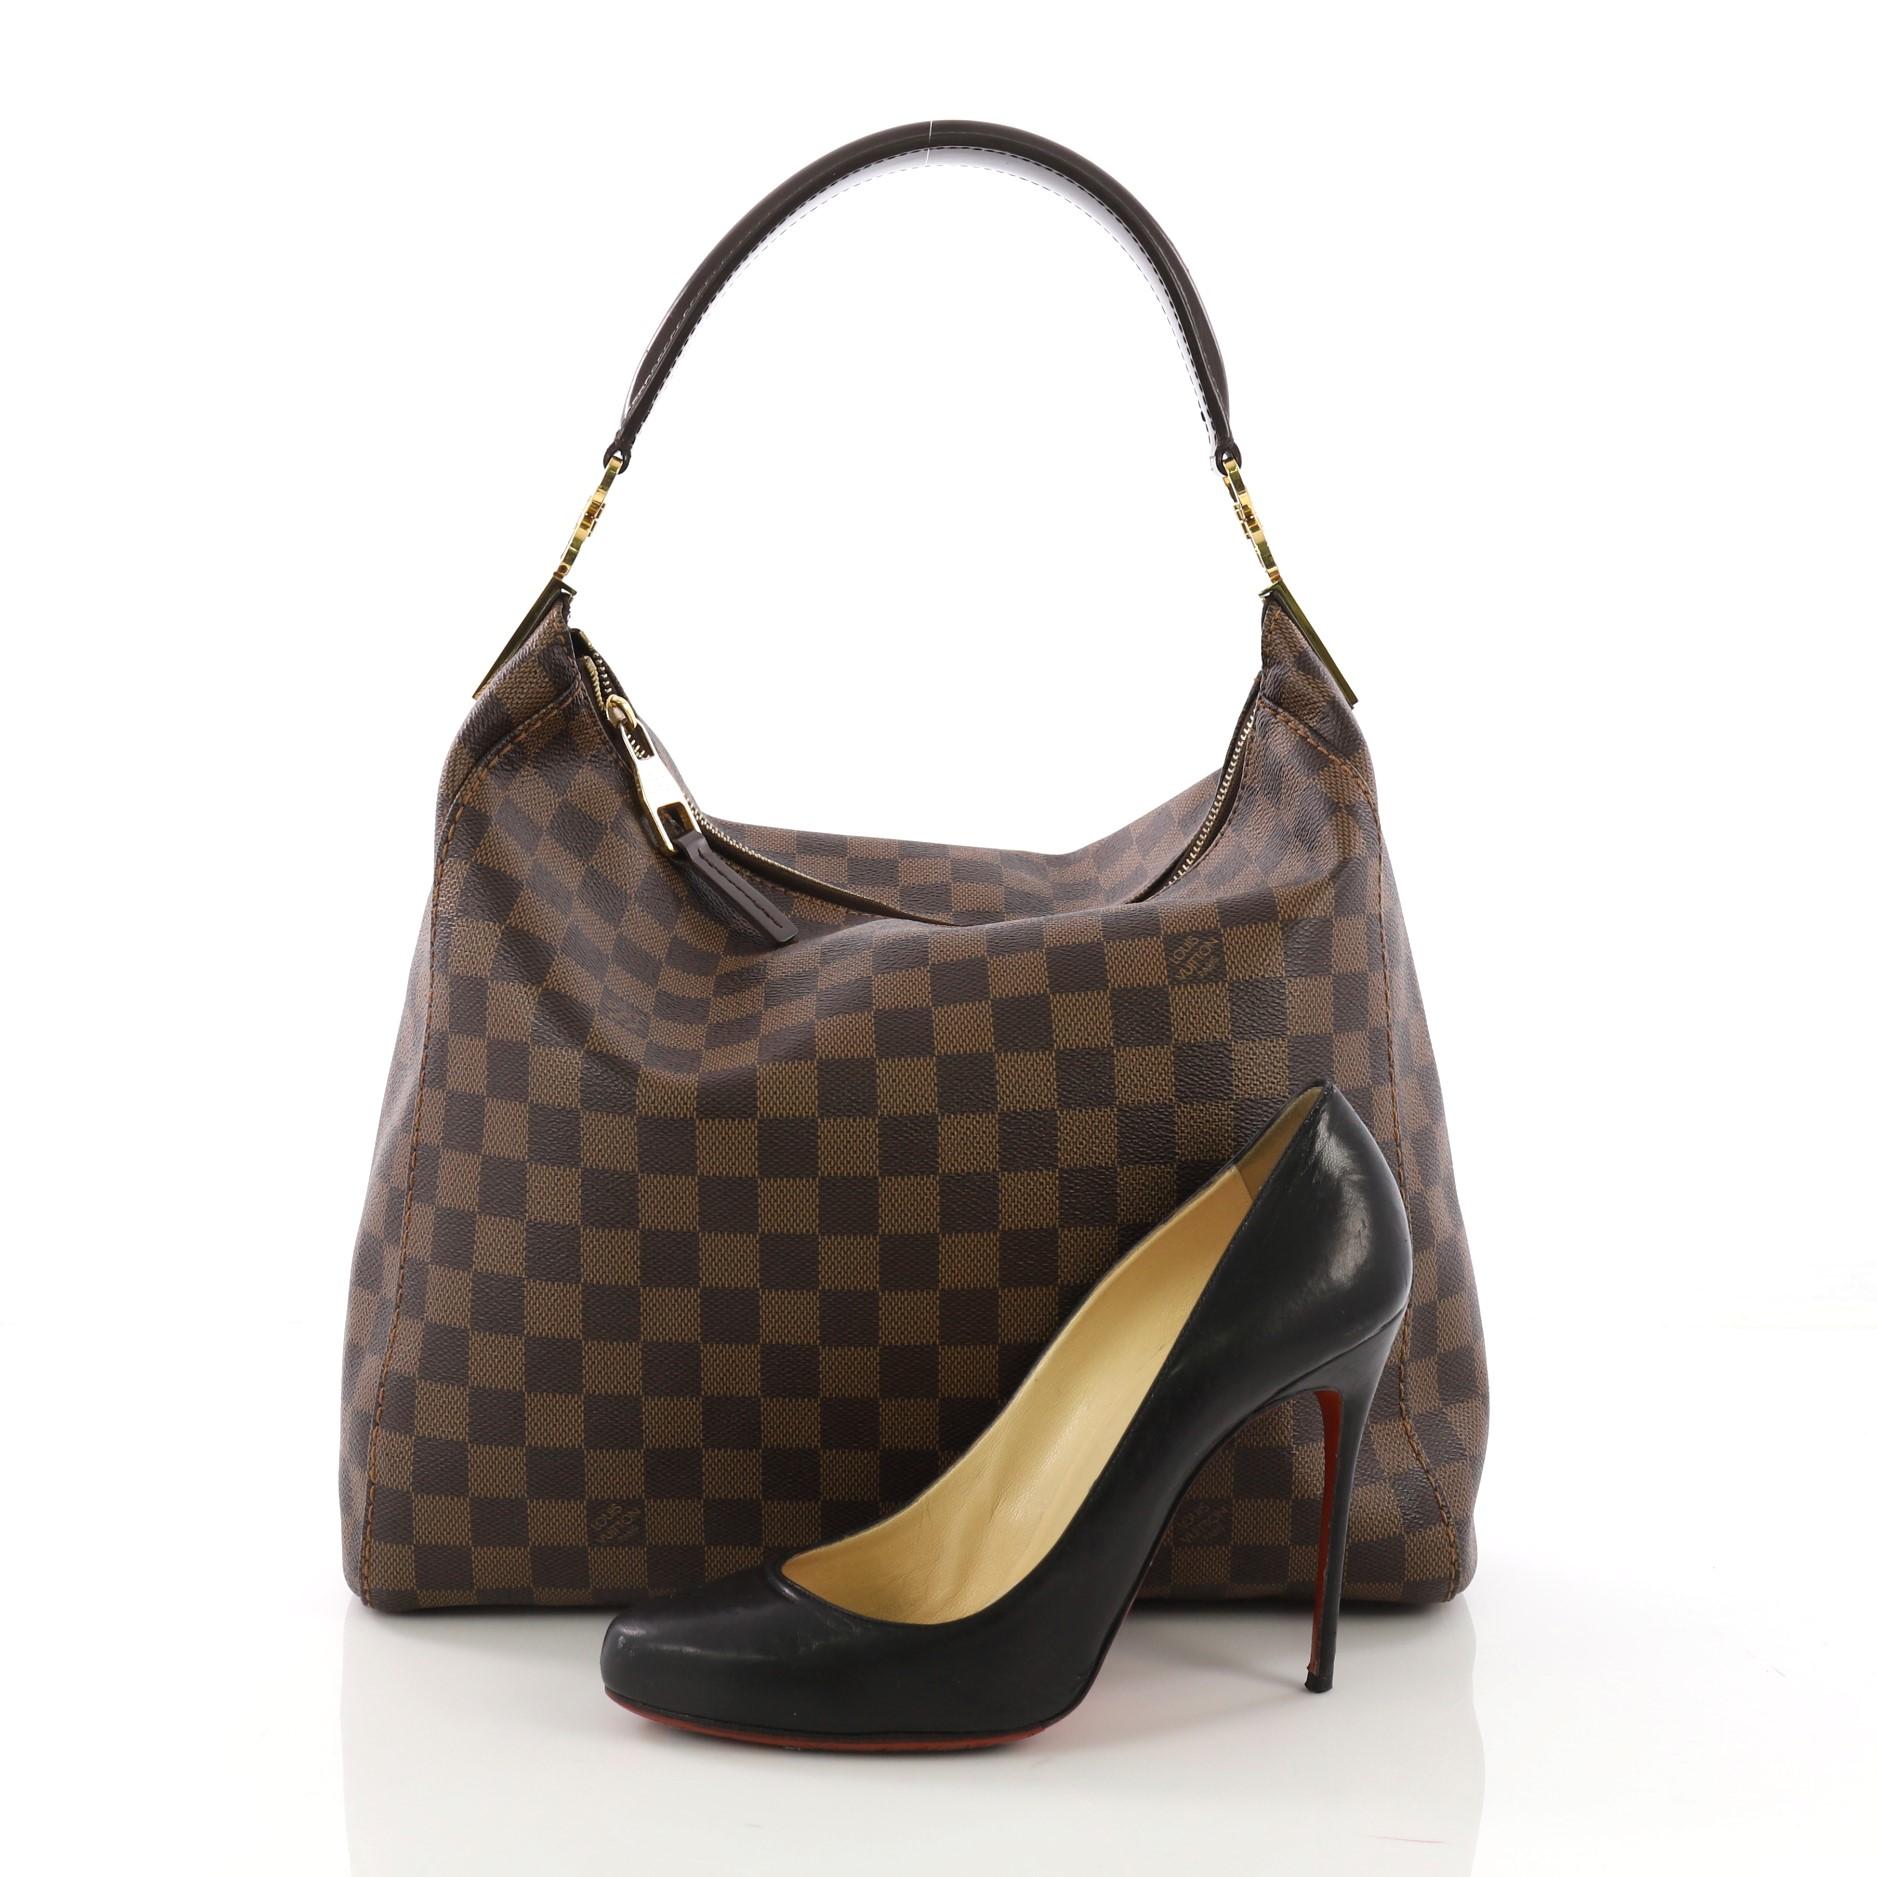 This Louis Vuitton Portobello Handbag Damier PM, crafted in damier ebene coated canvas, features a single looped leather handle and gold-tone hardware. Its top zip closure opens to a brown microfiber interior with side zip and slip pockets.